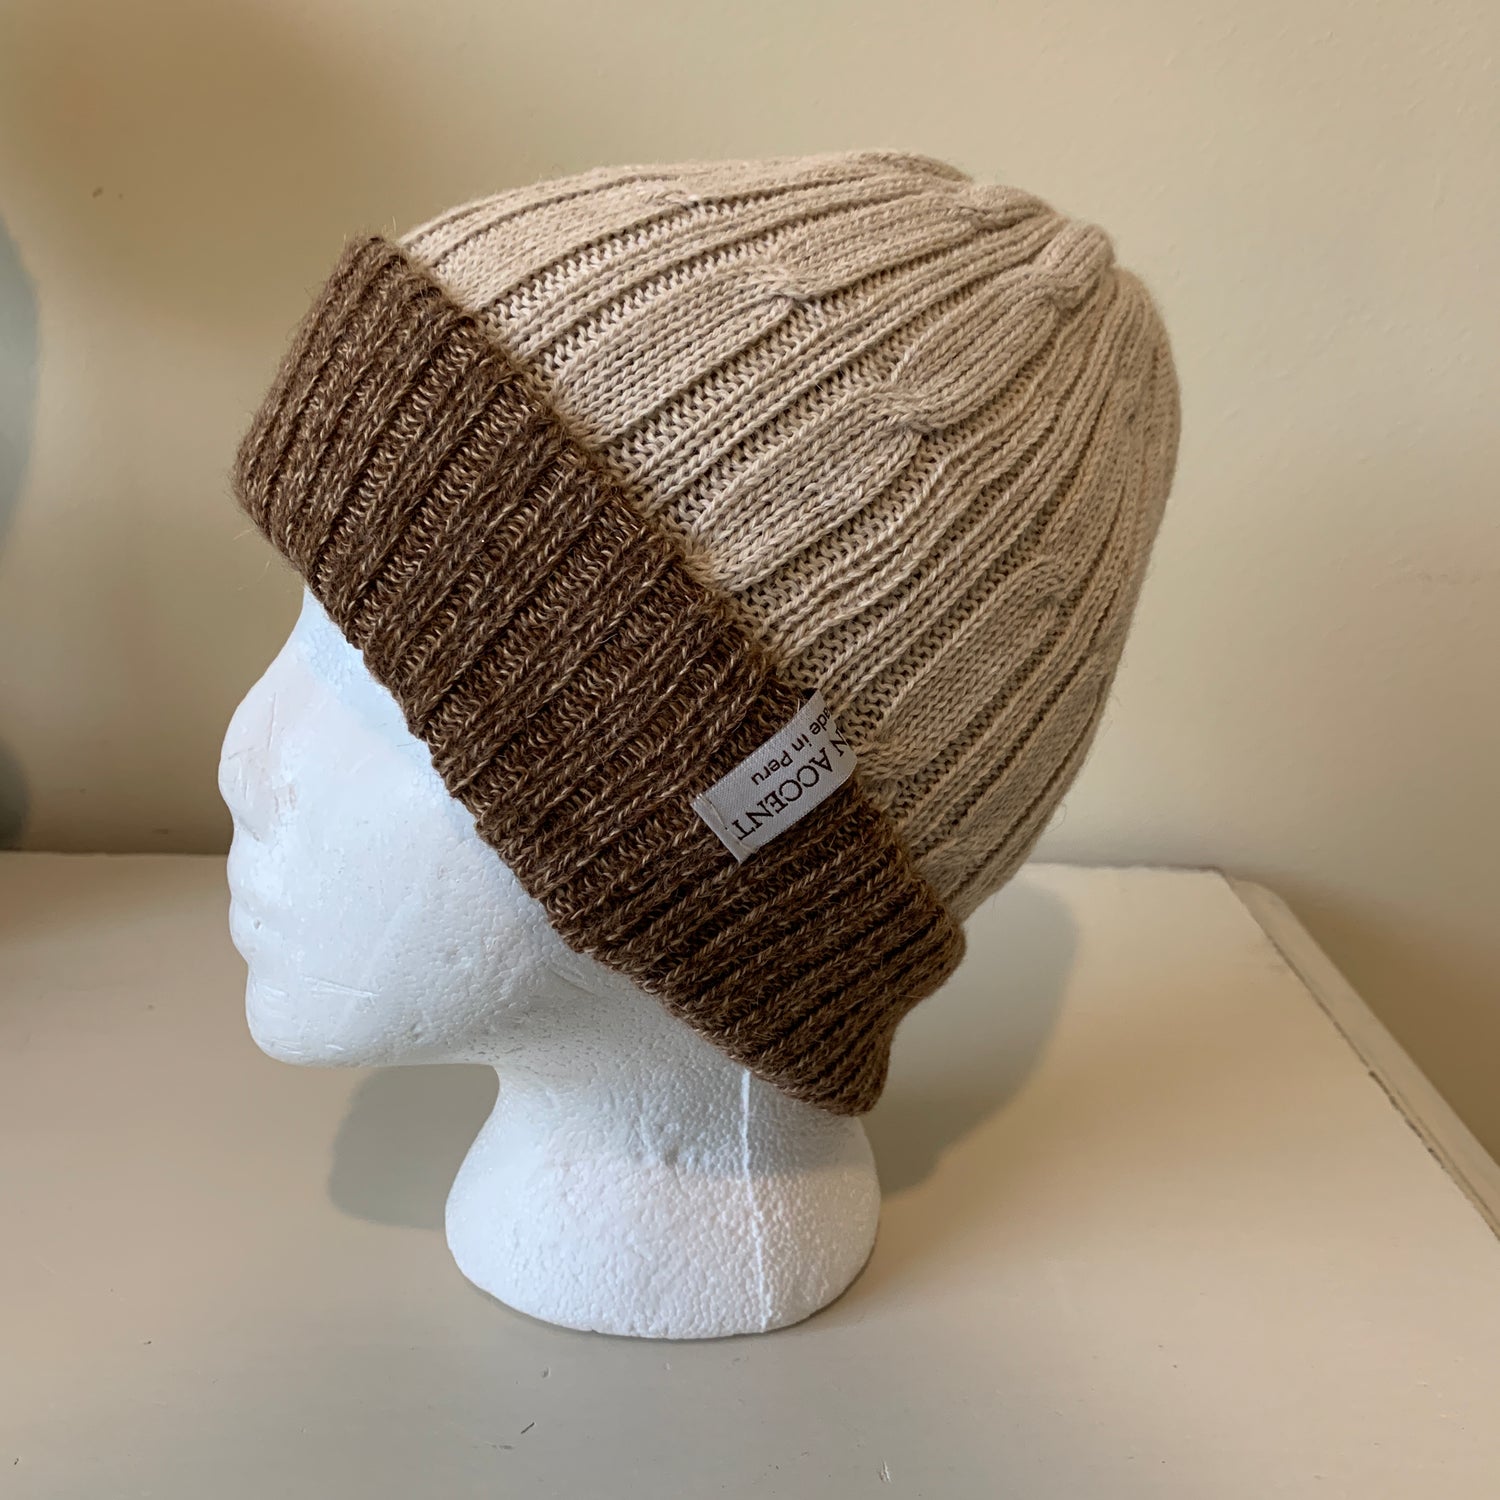 Reversible Alpaca Beanie. Beige with brown tweed and beige color. Made In Peru. - Peruvian Accent